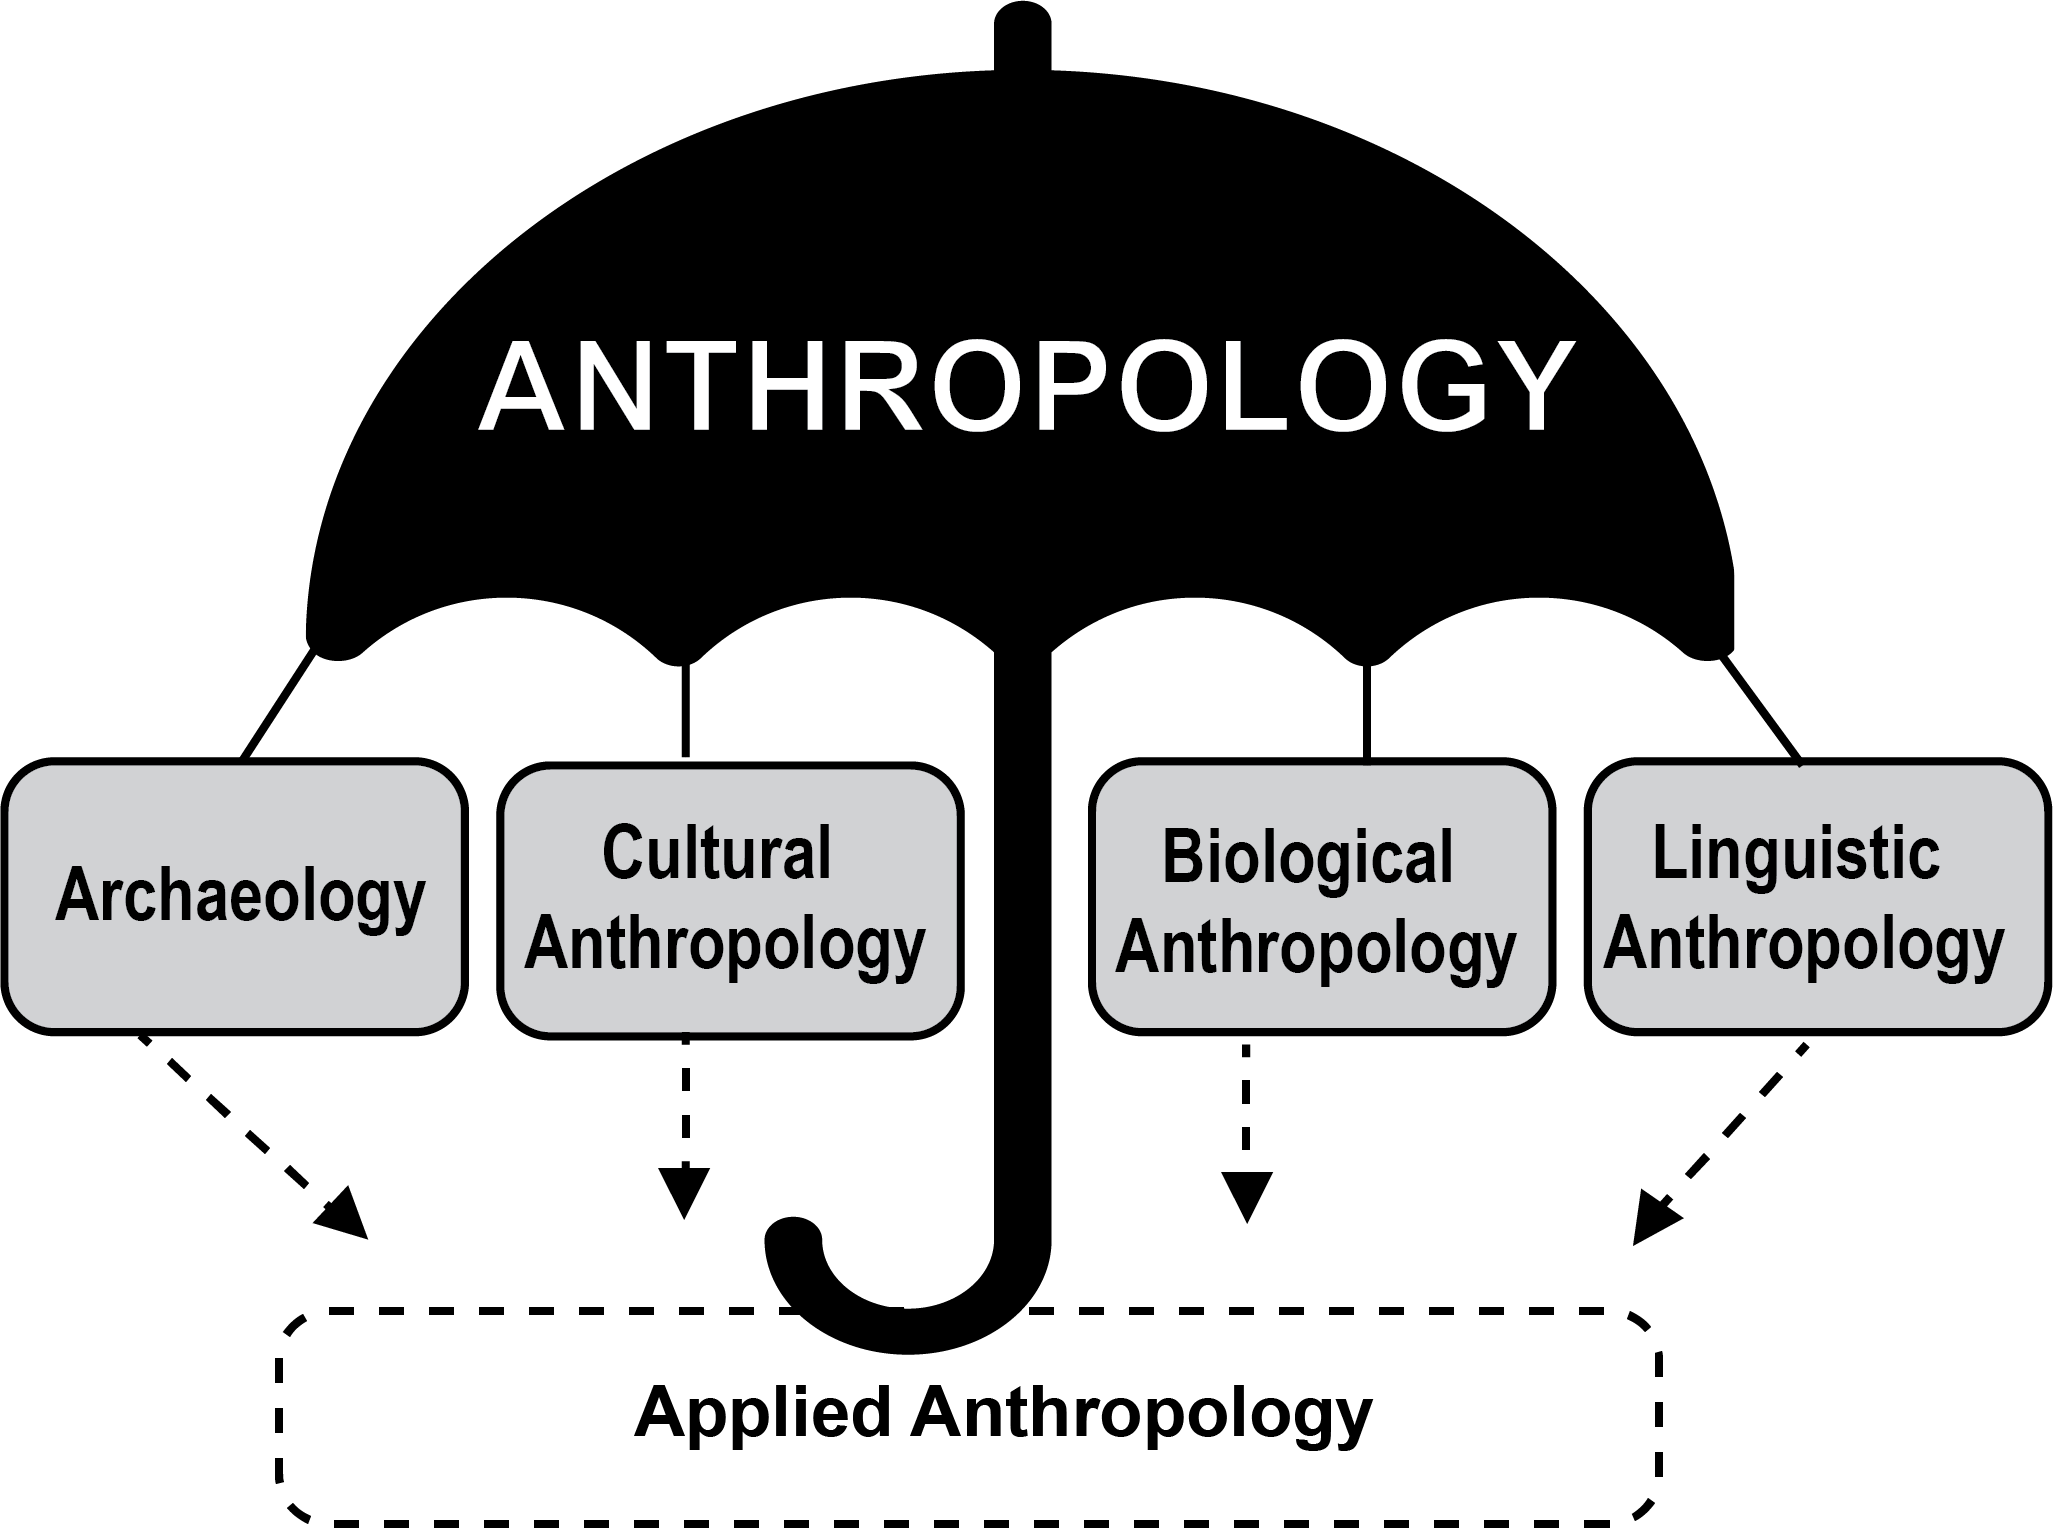 “anthropology” hovers over text boxes representing the subdisciplines.